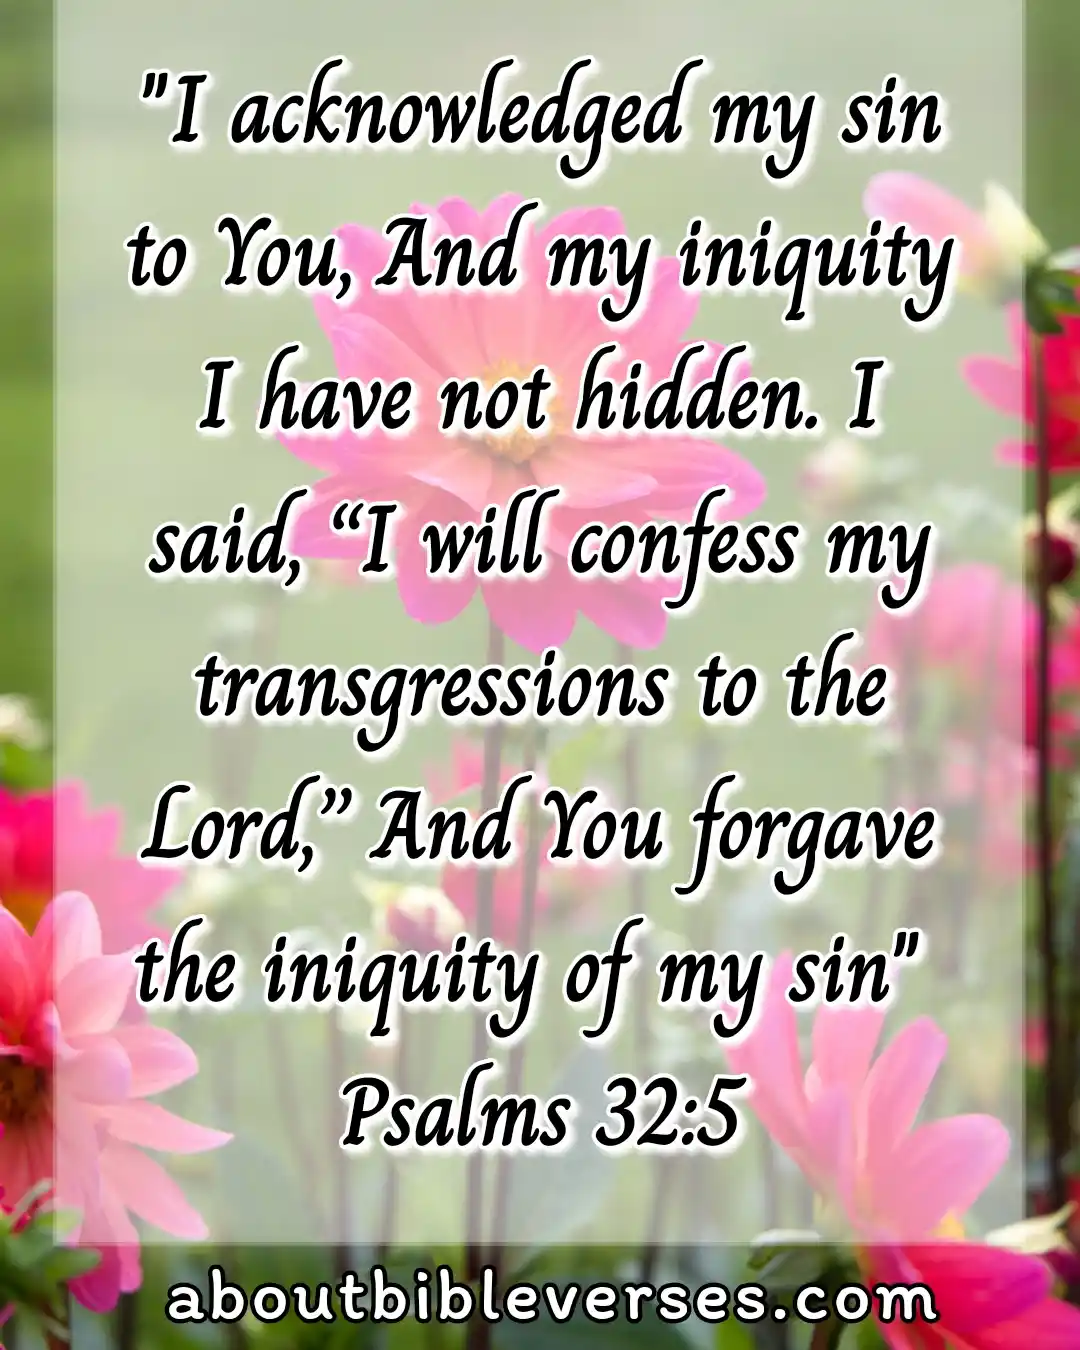 Today Bible Verse (Psalm 32:5)